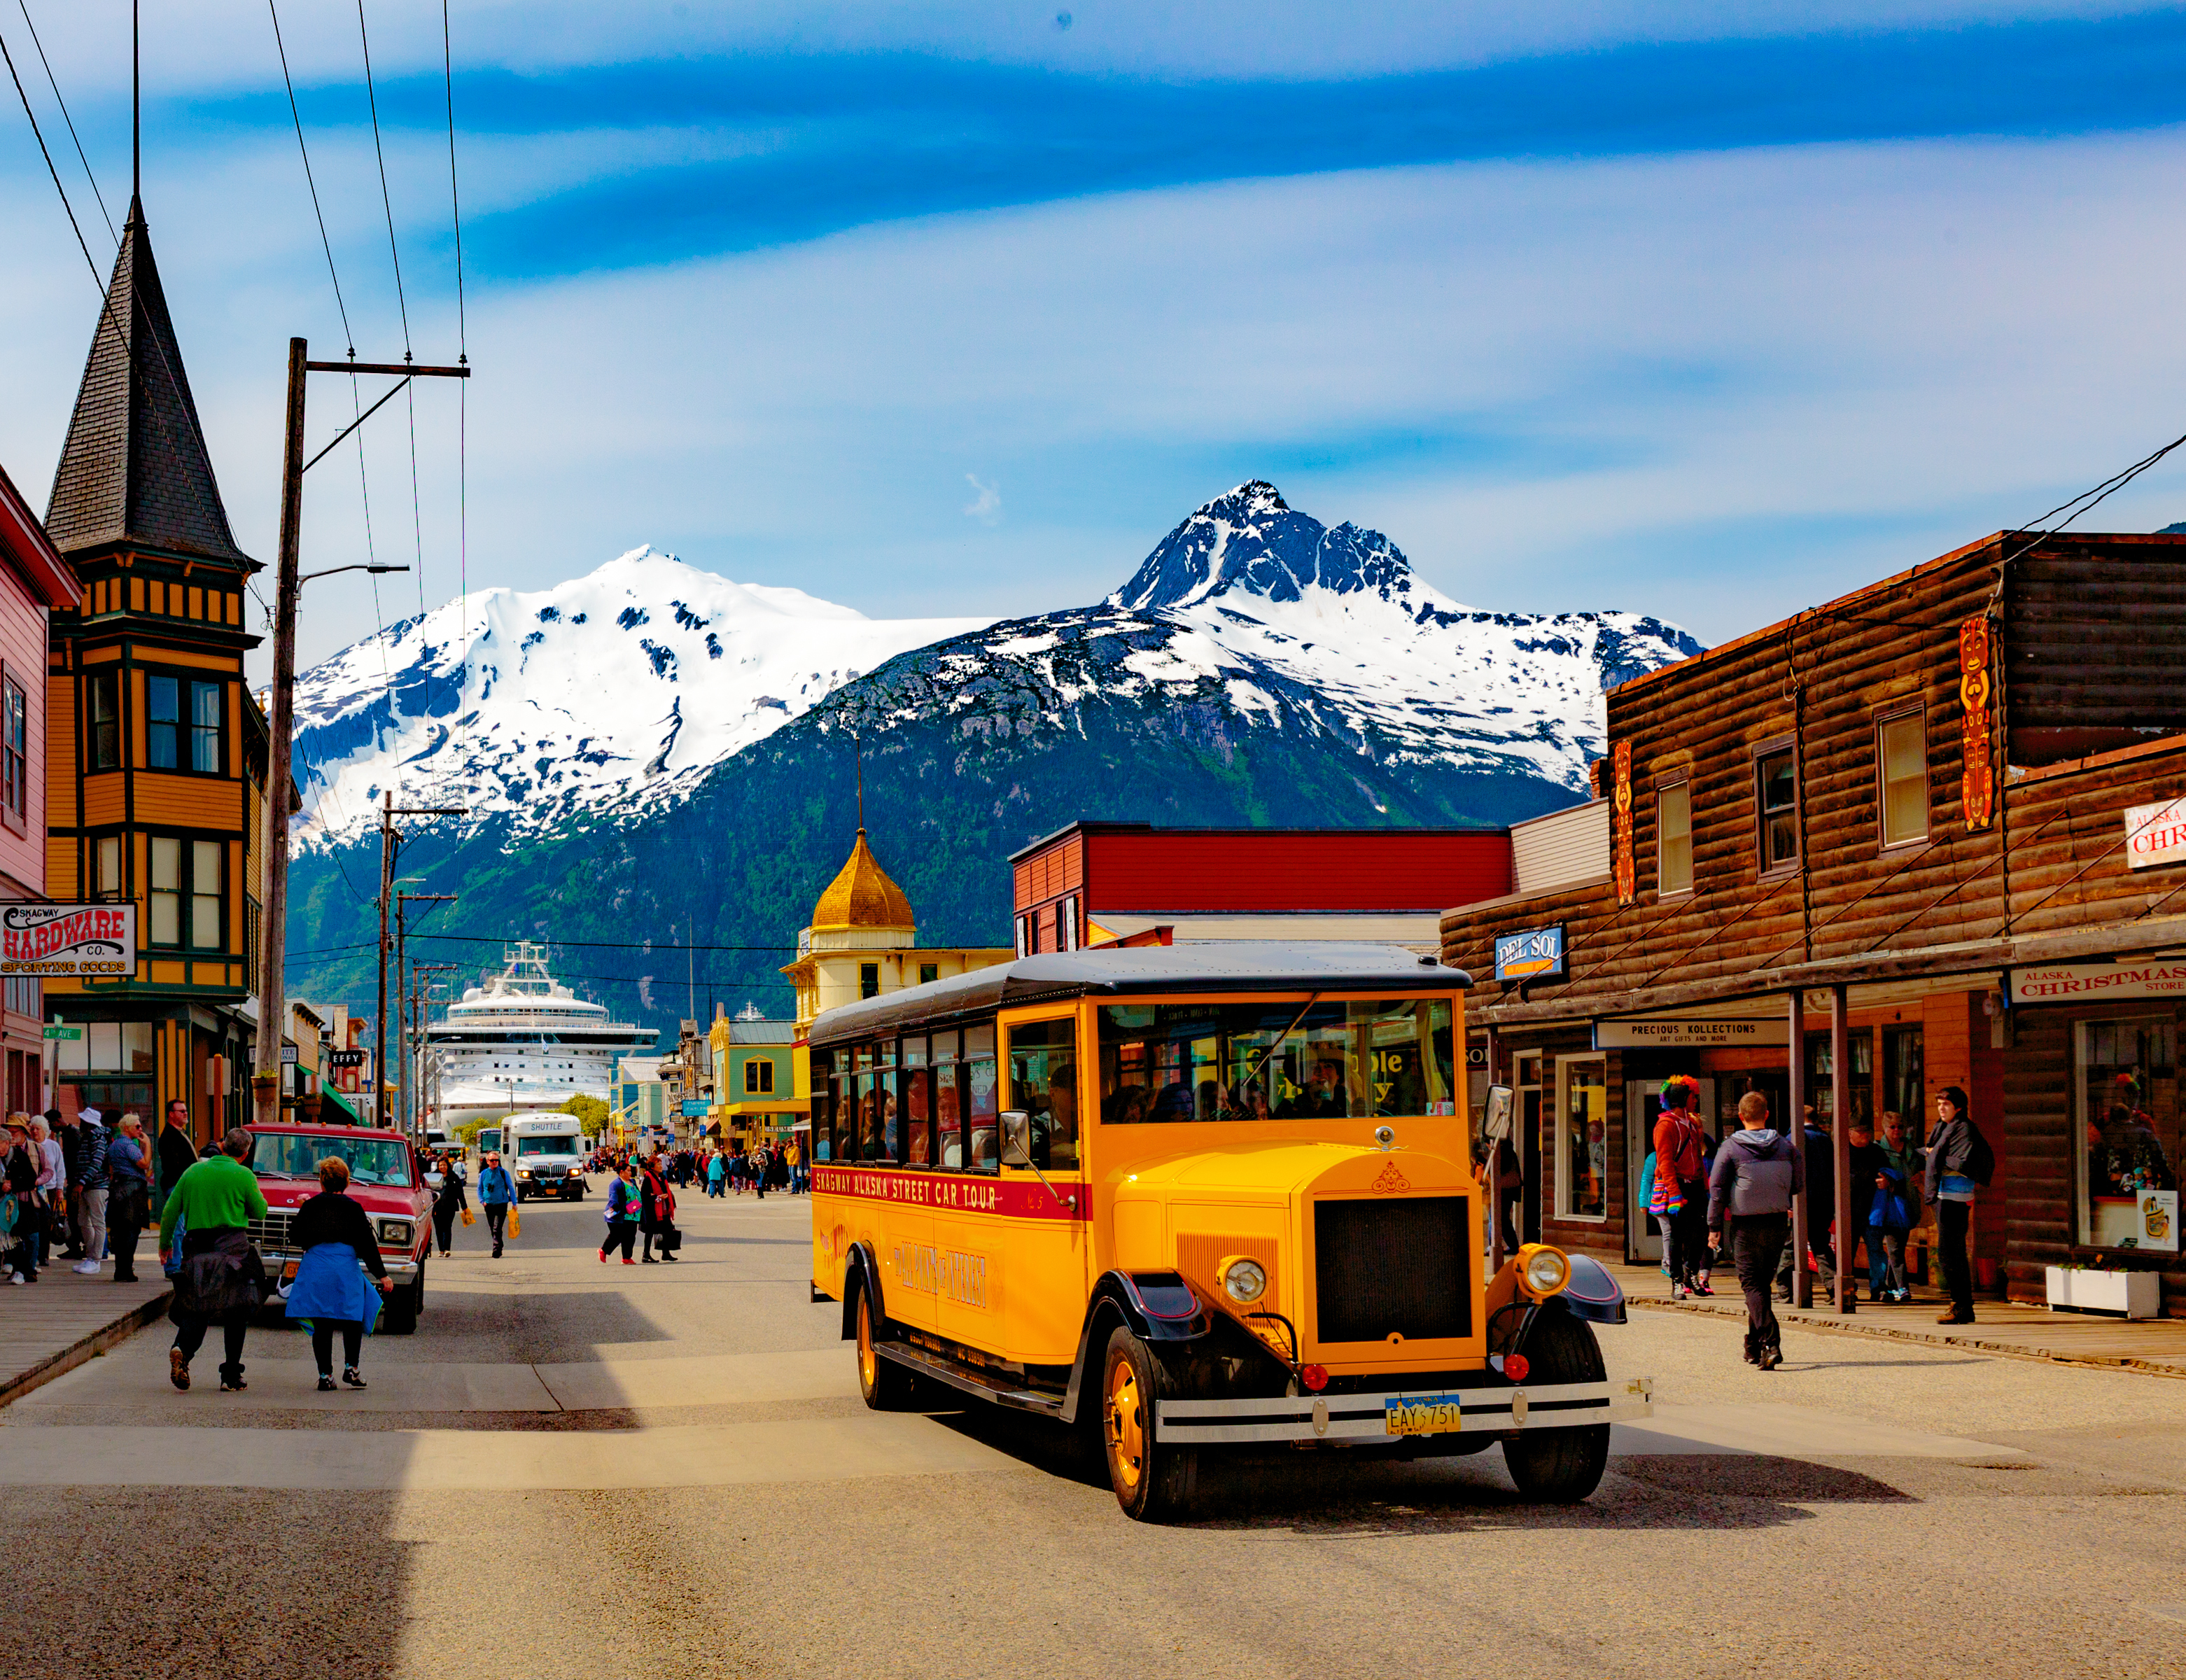 #14 go back in time when you visit small towns in Alaska (this is Skagway)